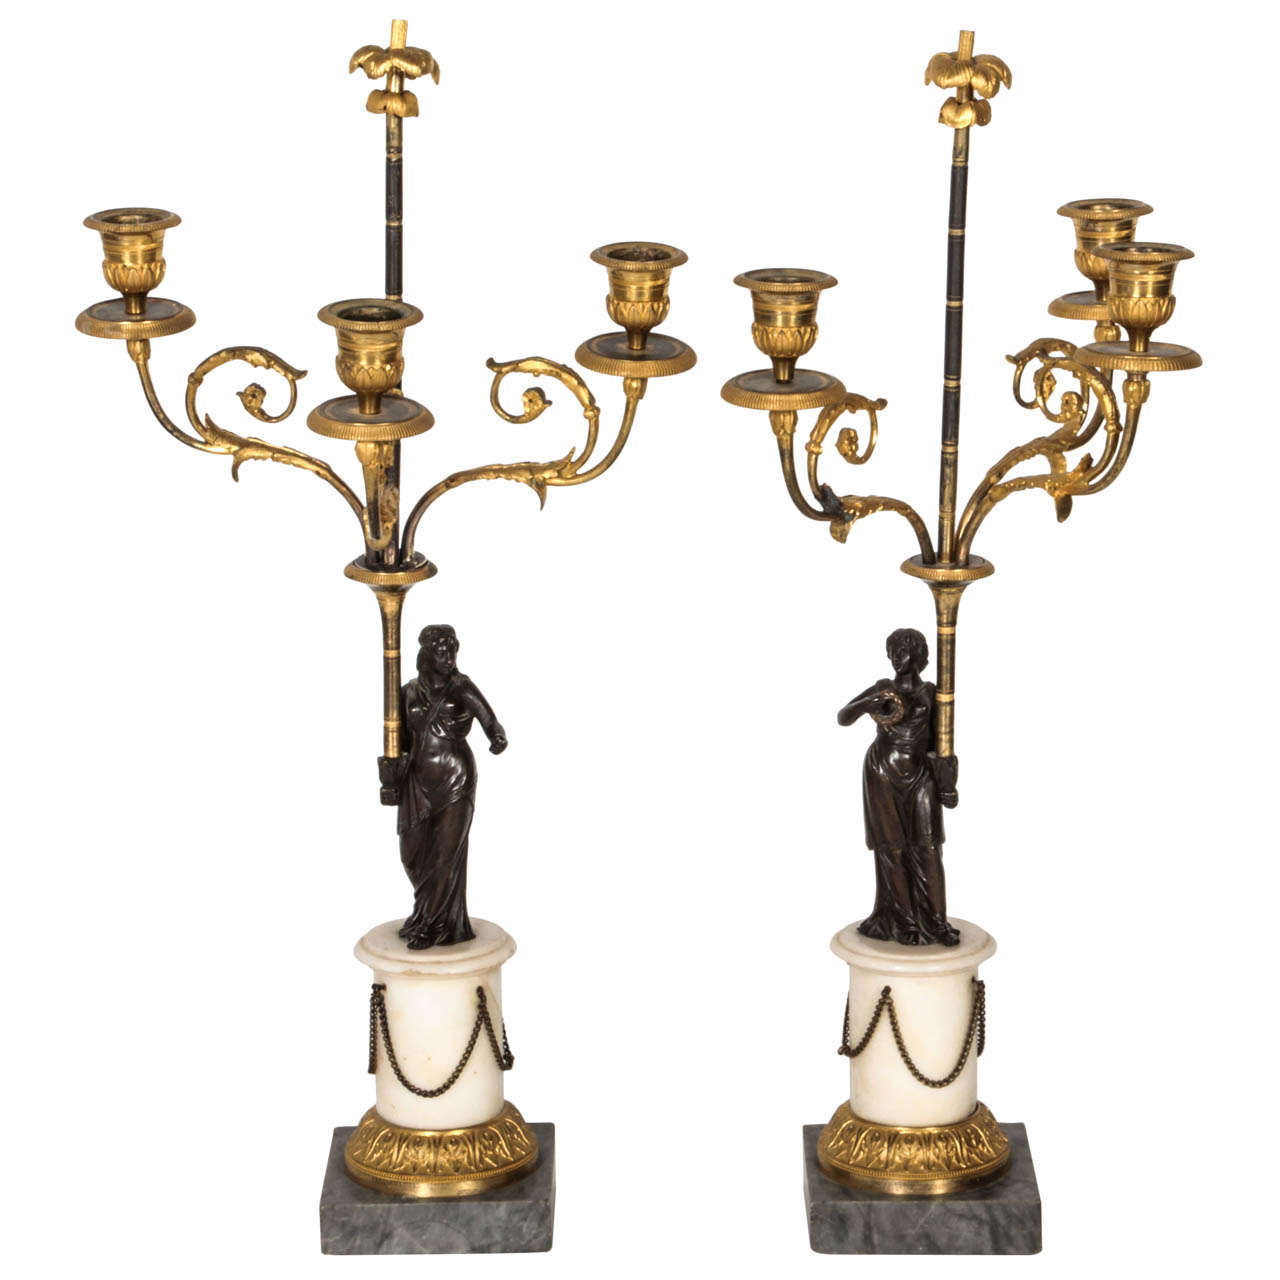 Pair of ormolu gilded and bronze three-armed candelabra.